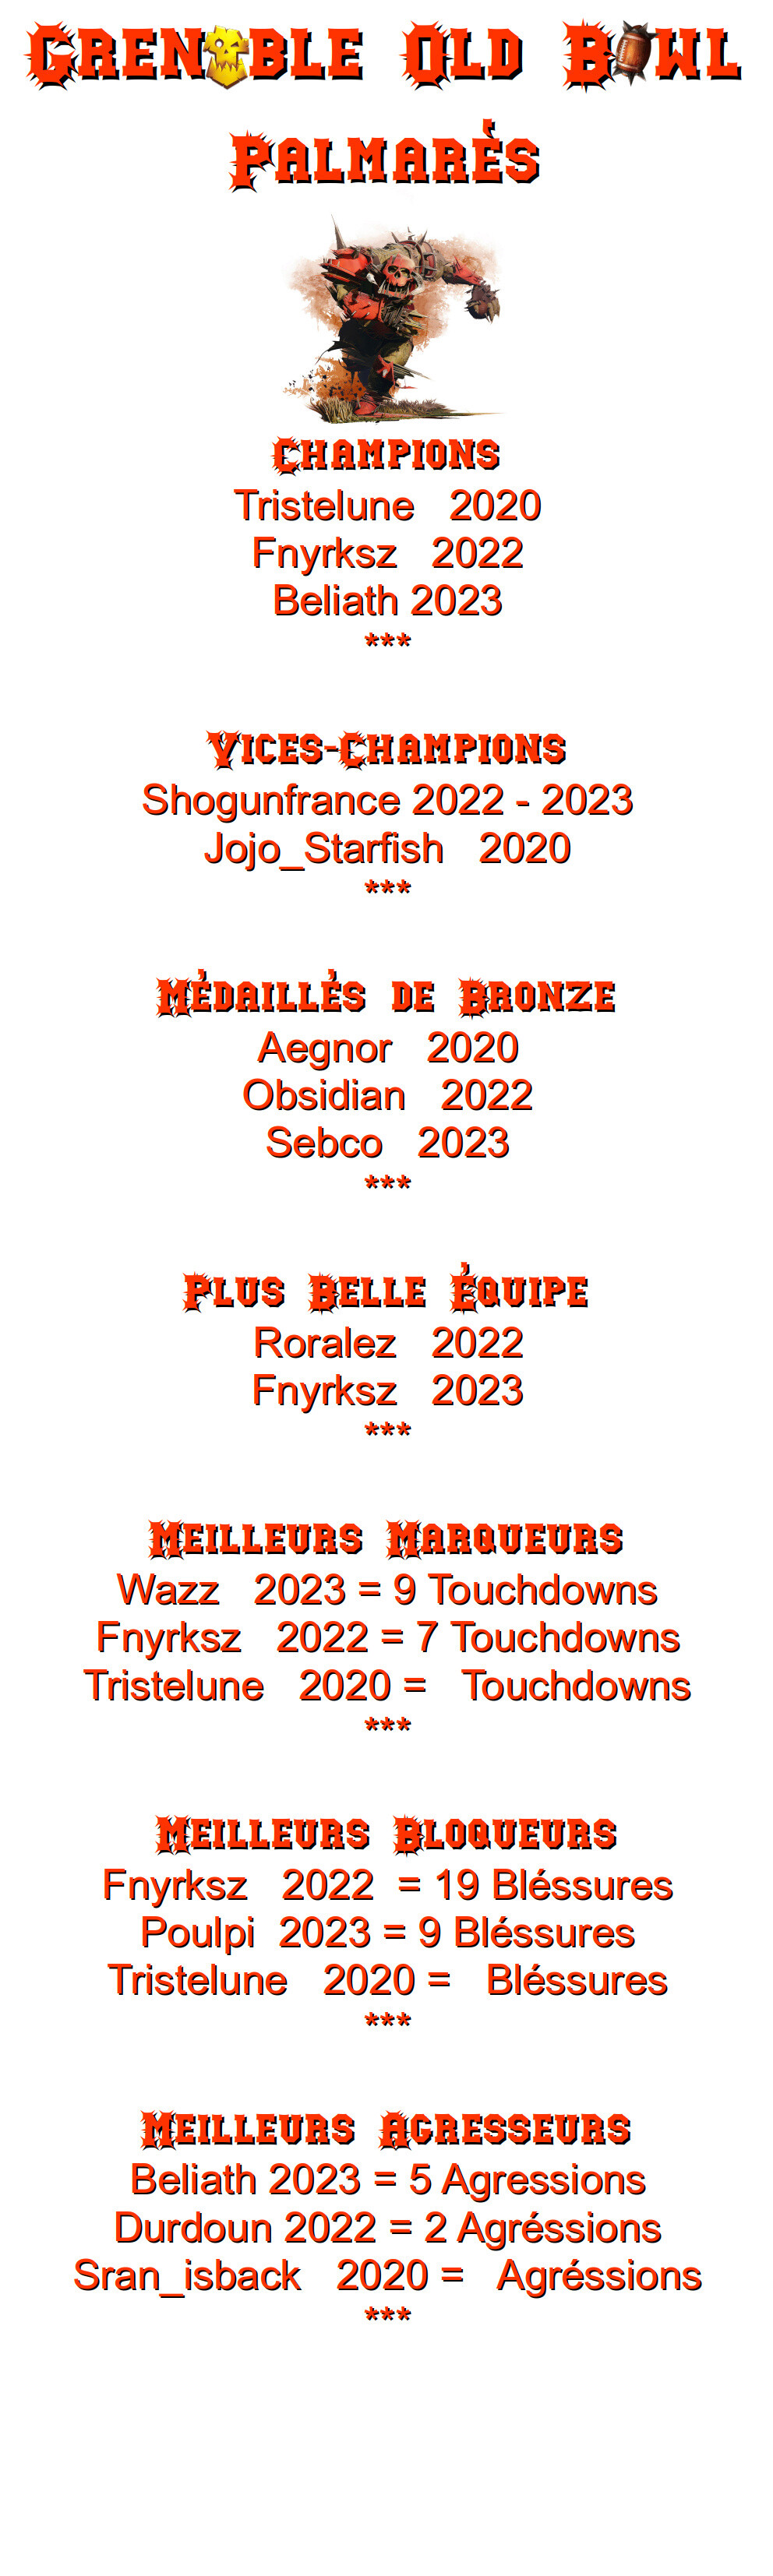 Grenoble Old Bowl III 15 janvier 2023 - Page 3 Gob_pa11